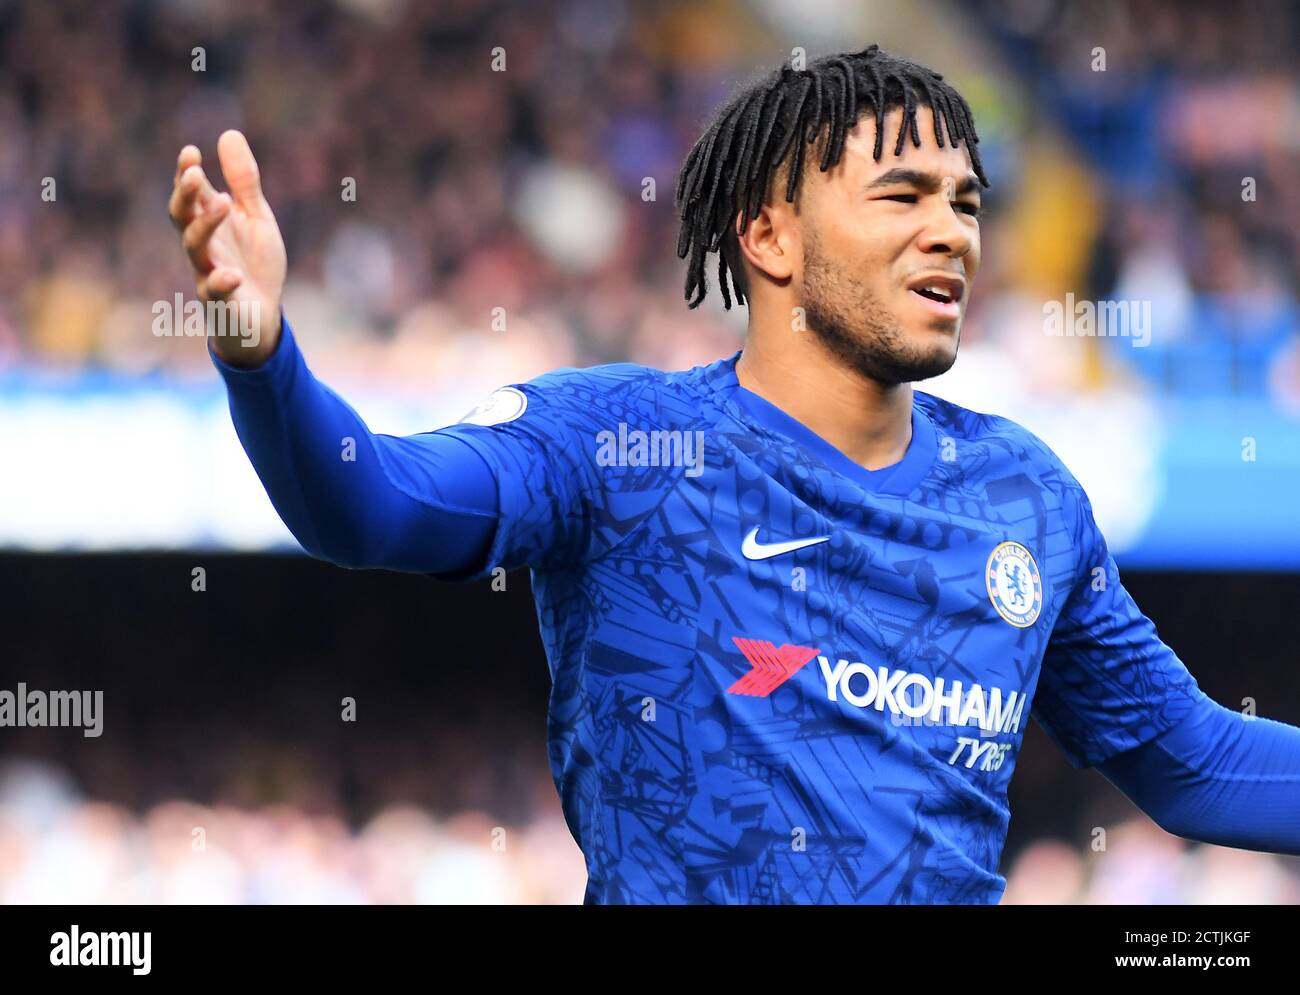 LONDON, ENGLAND - FEBRUARY 22, 2020: Reece James of Chelsea pictured during the 2019/20 Premier League game between Chelsea FC and Tottenham Hotspur FC at Stamford Bridge. Stock Photo